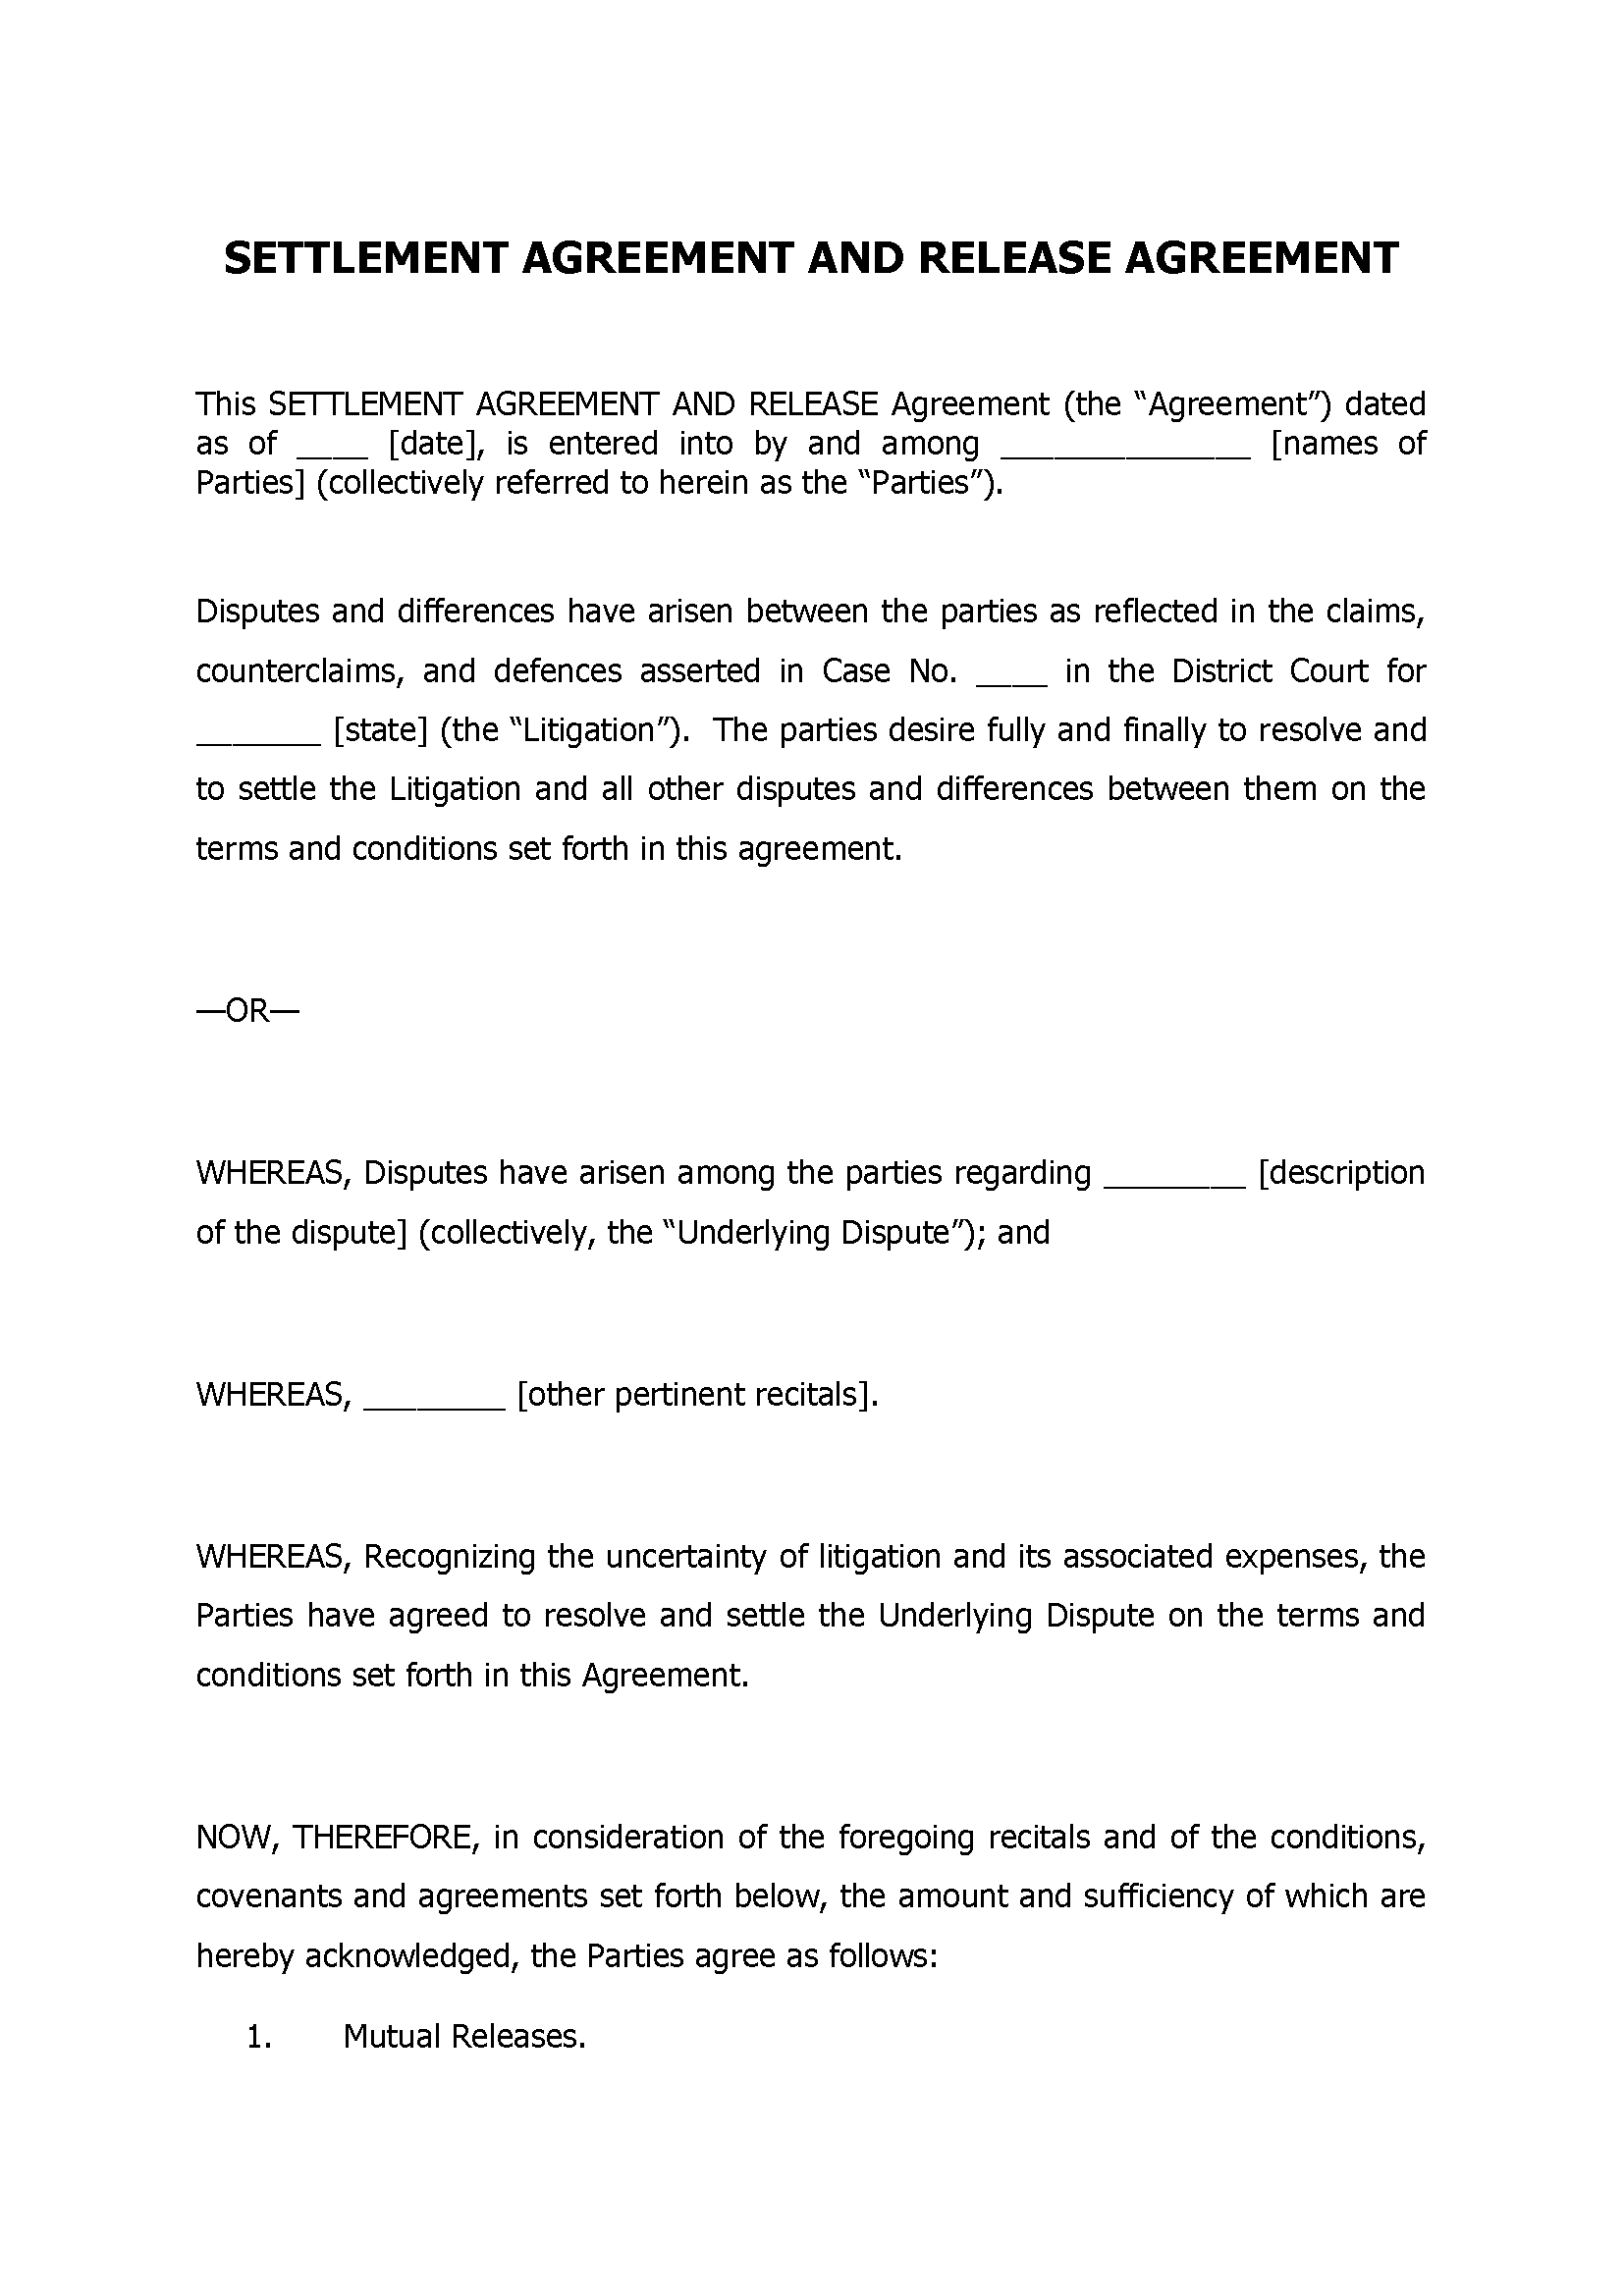 Settlement Agreement And Release Agreement